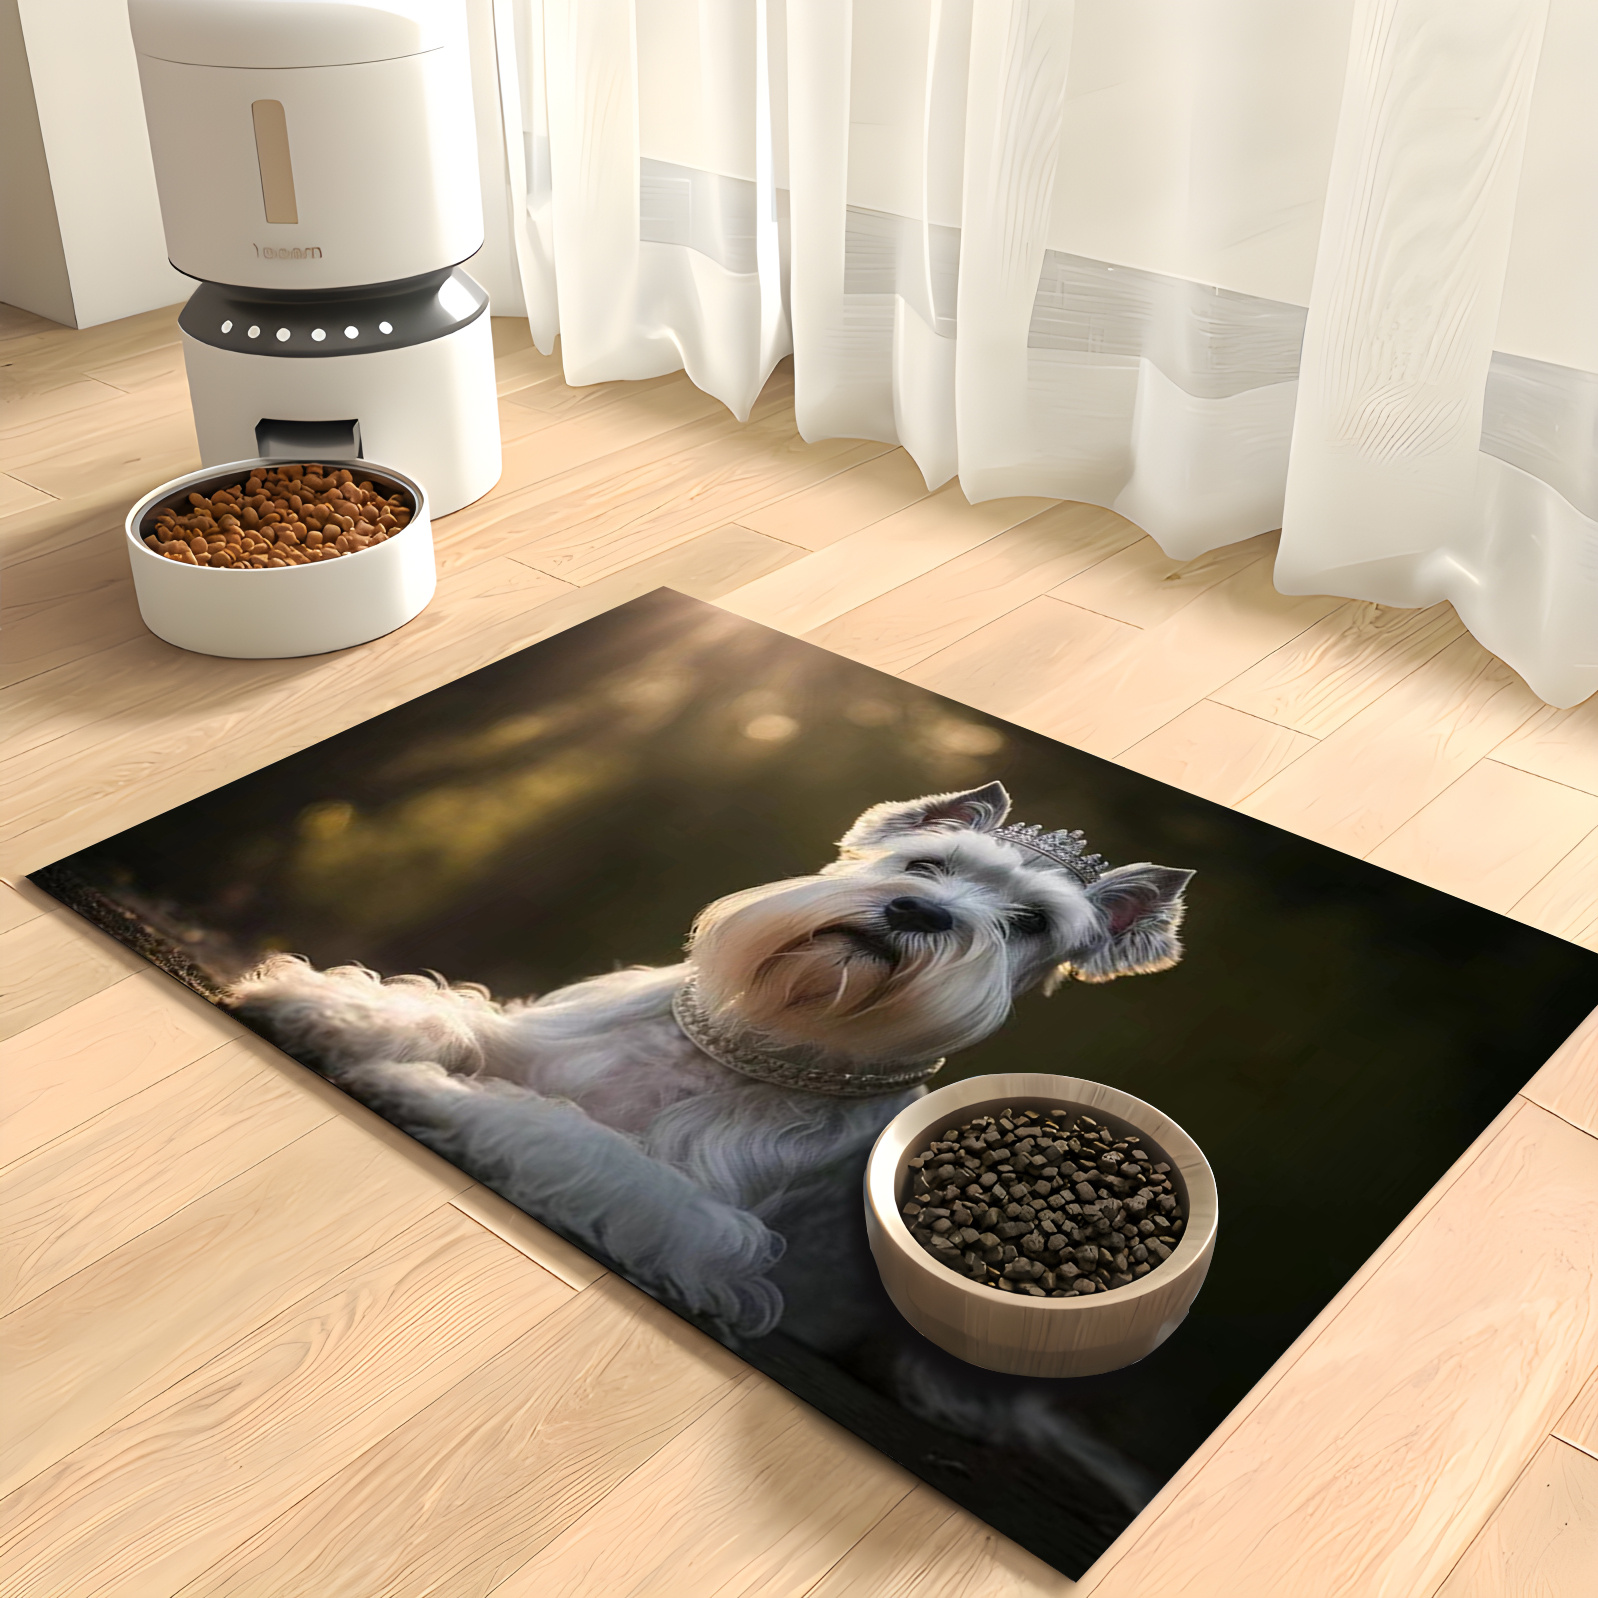 

Schnauzer-themed Dog Feeding Mat - Waterproof, Stain-resistant & Easy To Clean For Indoor/outdoor Use Enhance Your Pet's Dining Experience - Stylish & Functional